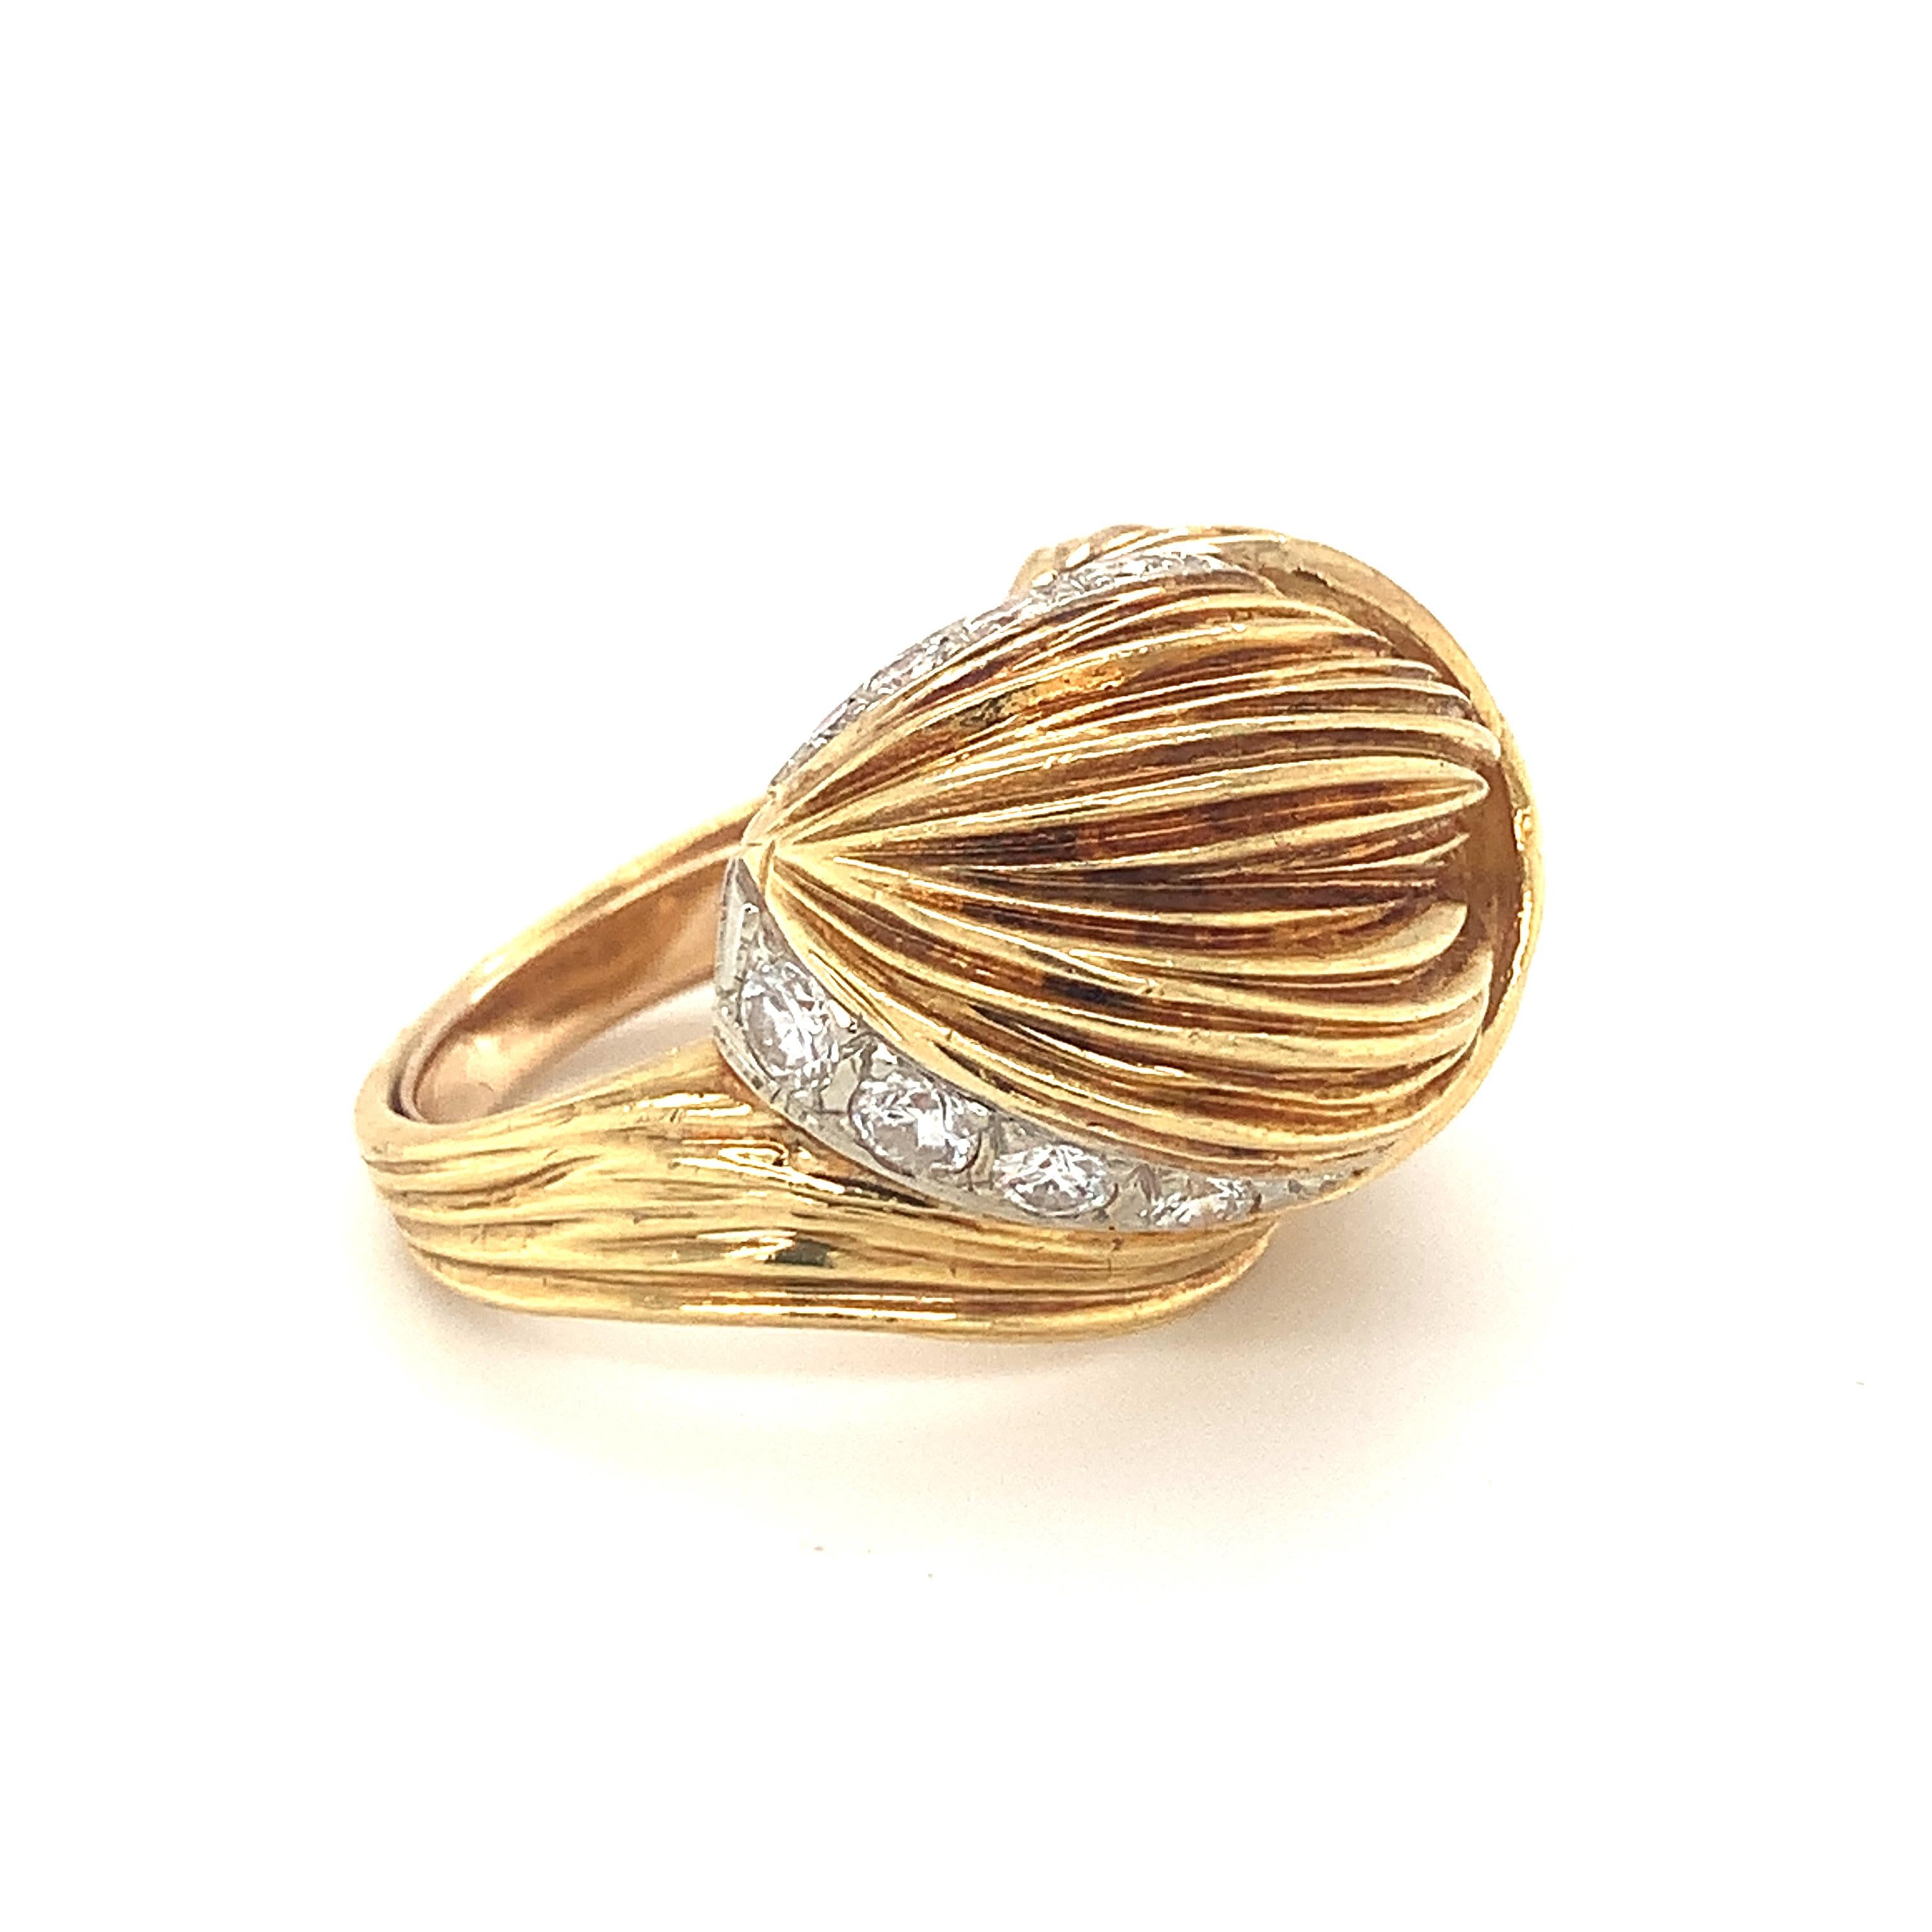 Diamond 18K yellow gold ribbed knot ring with ten round brilliant cut diamonds totaling 0.85 ct. with G-H color and VS-2 clarity. Completed with a high dimension design and a custom ring sizing guard. Circa 1960s.

Metal: 18K yellow gold
Gemstone: